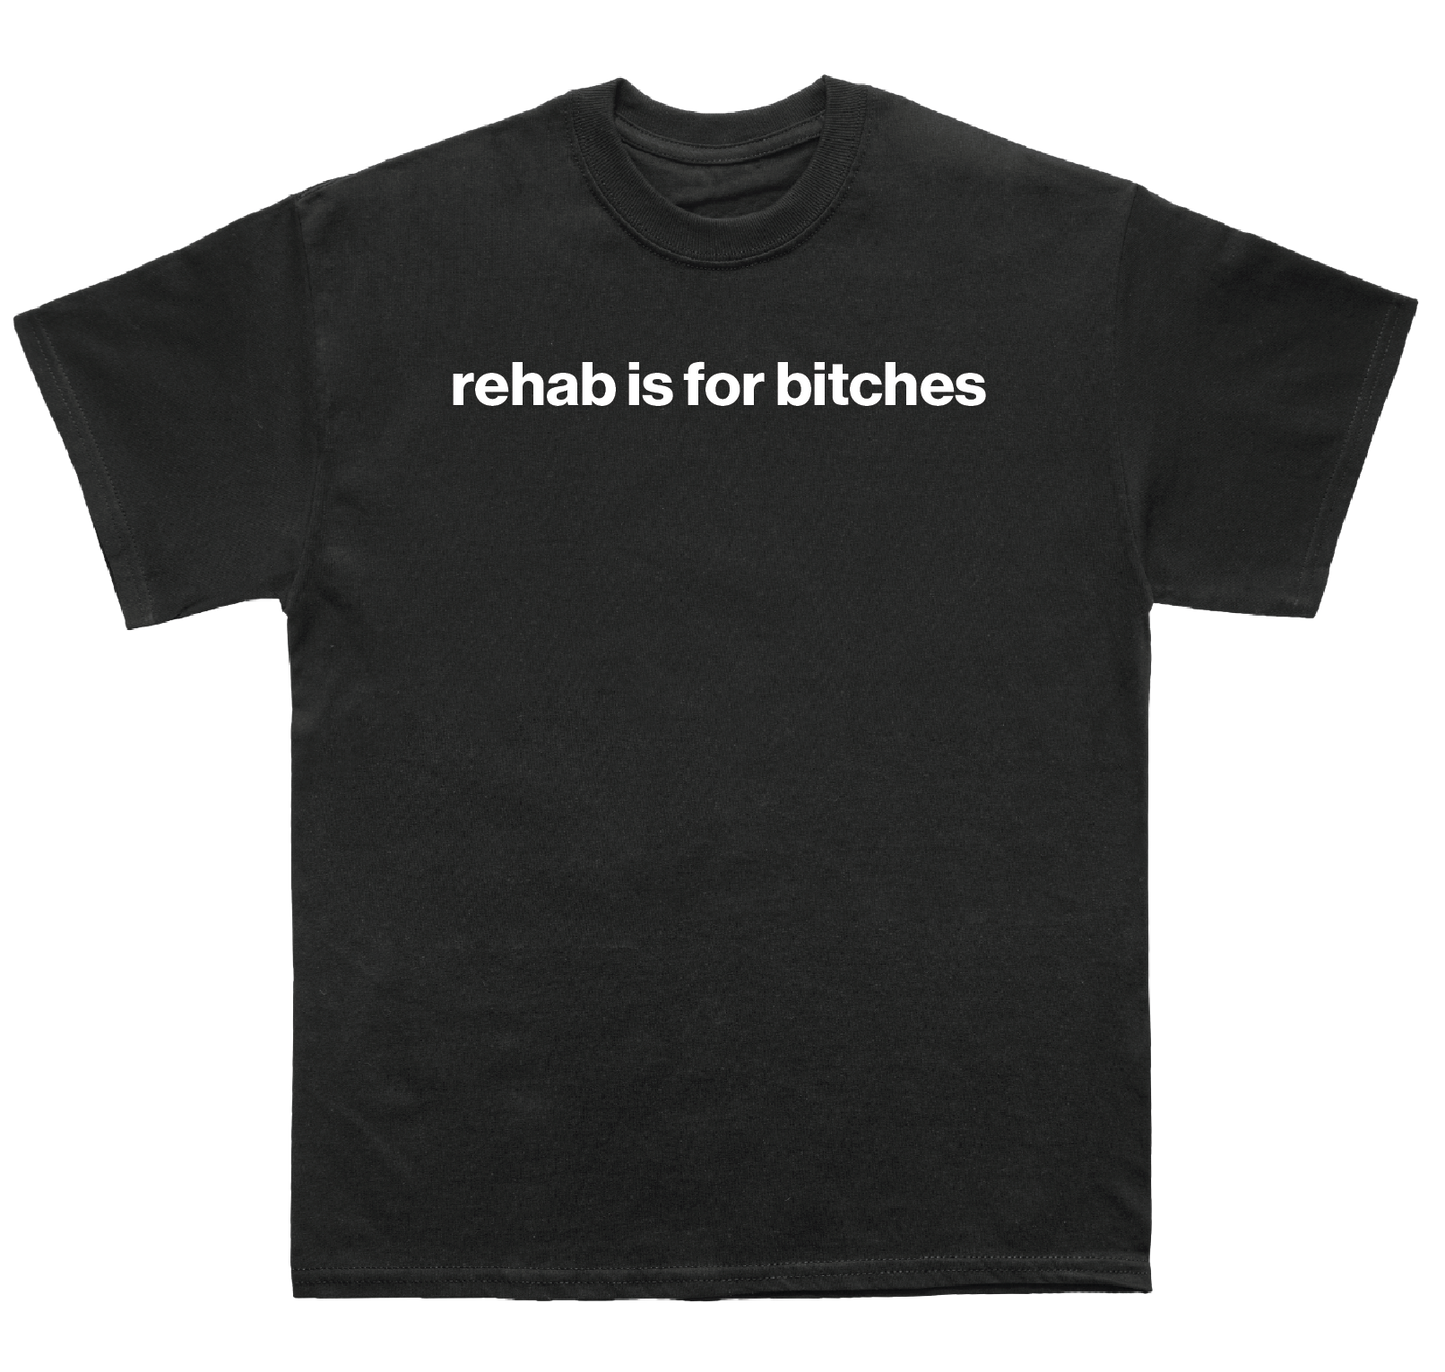 rehab is for bitches shirt